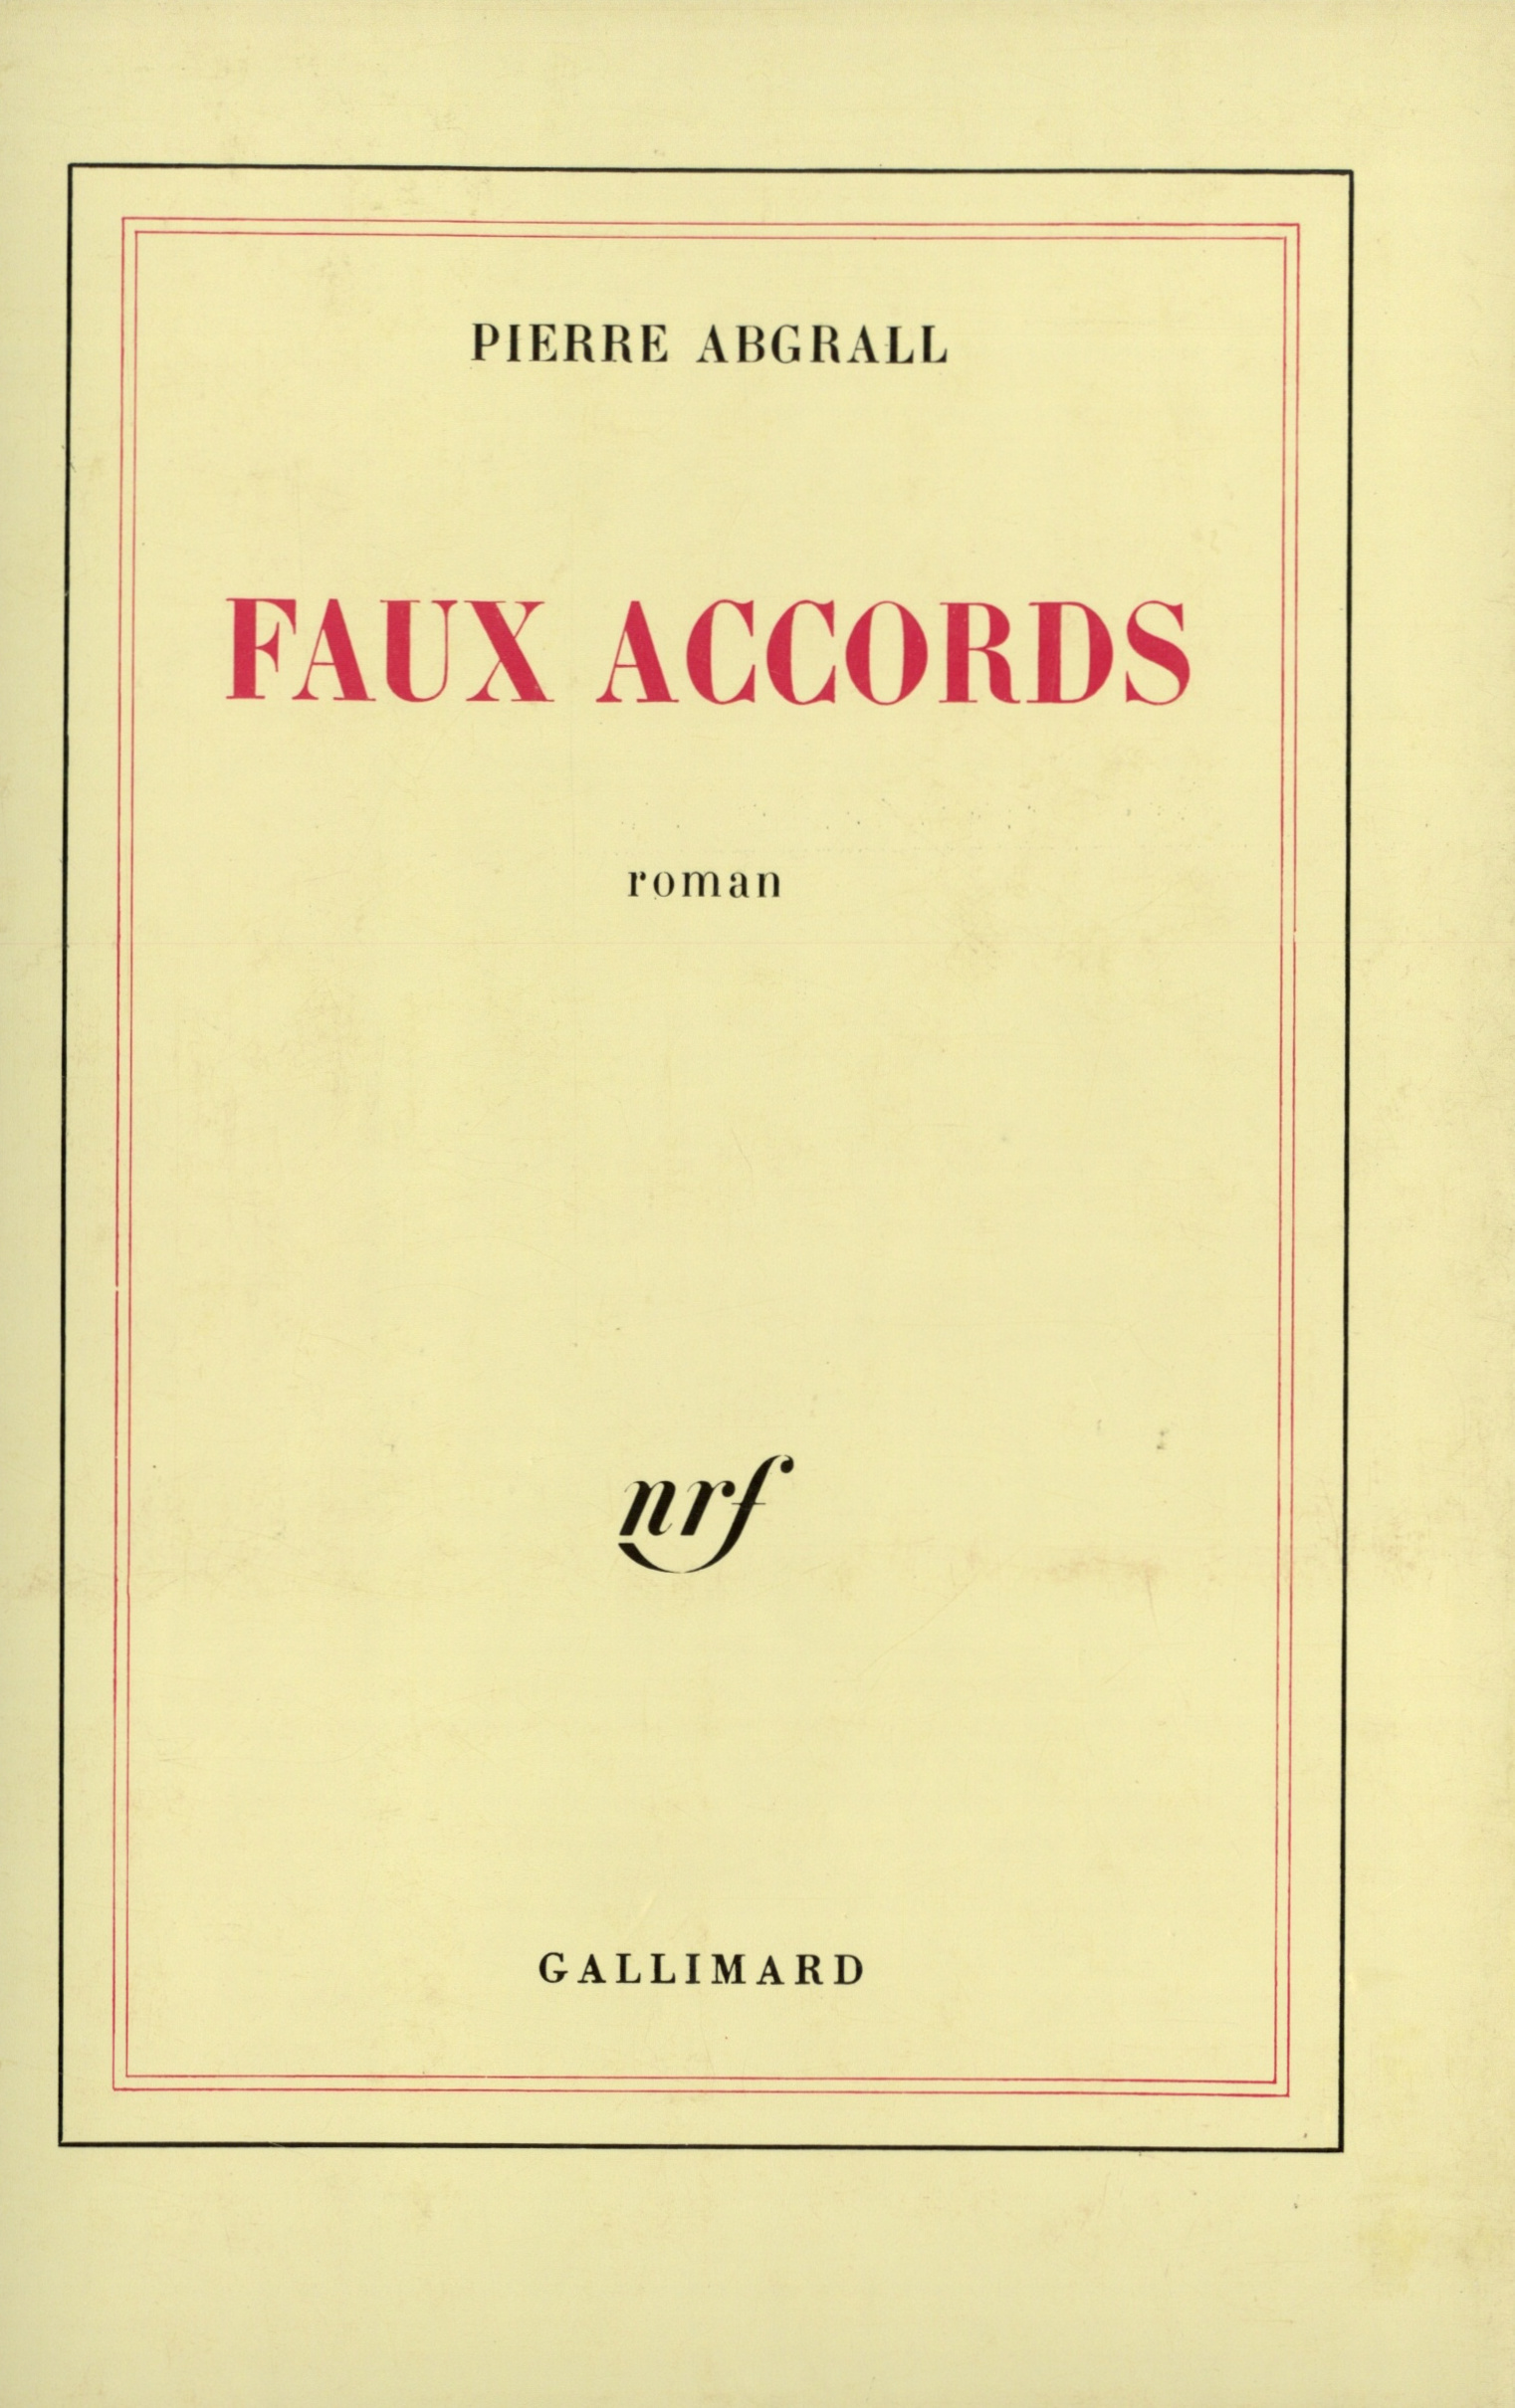 Faux accords (9782070712694-front-cover)